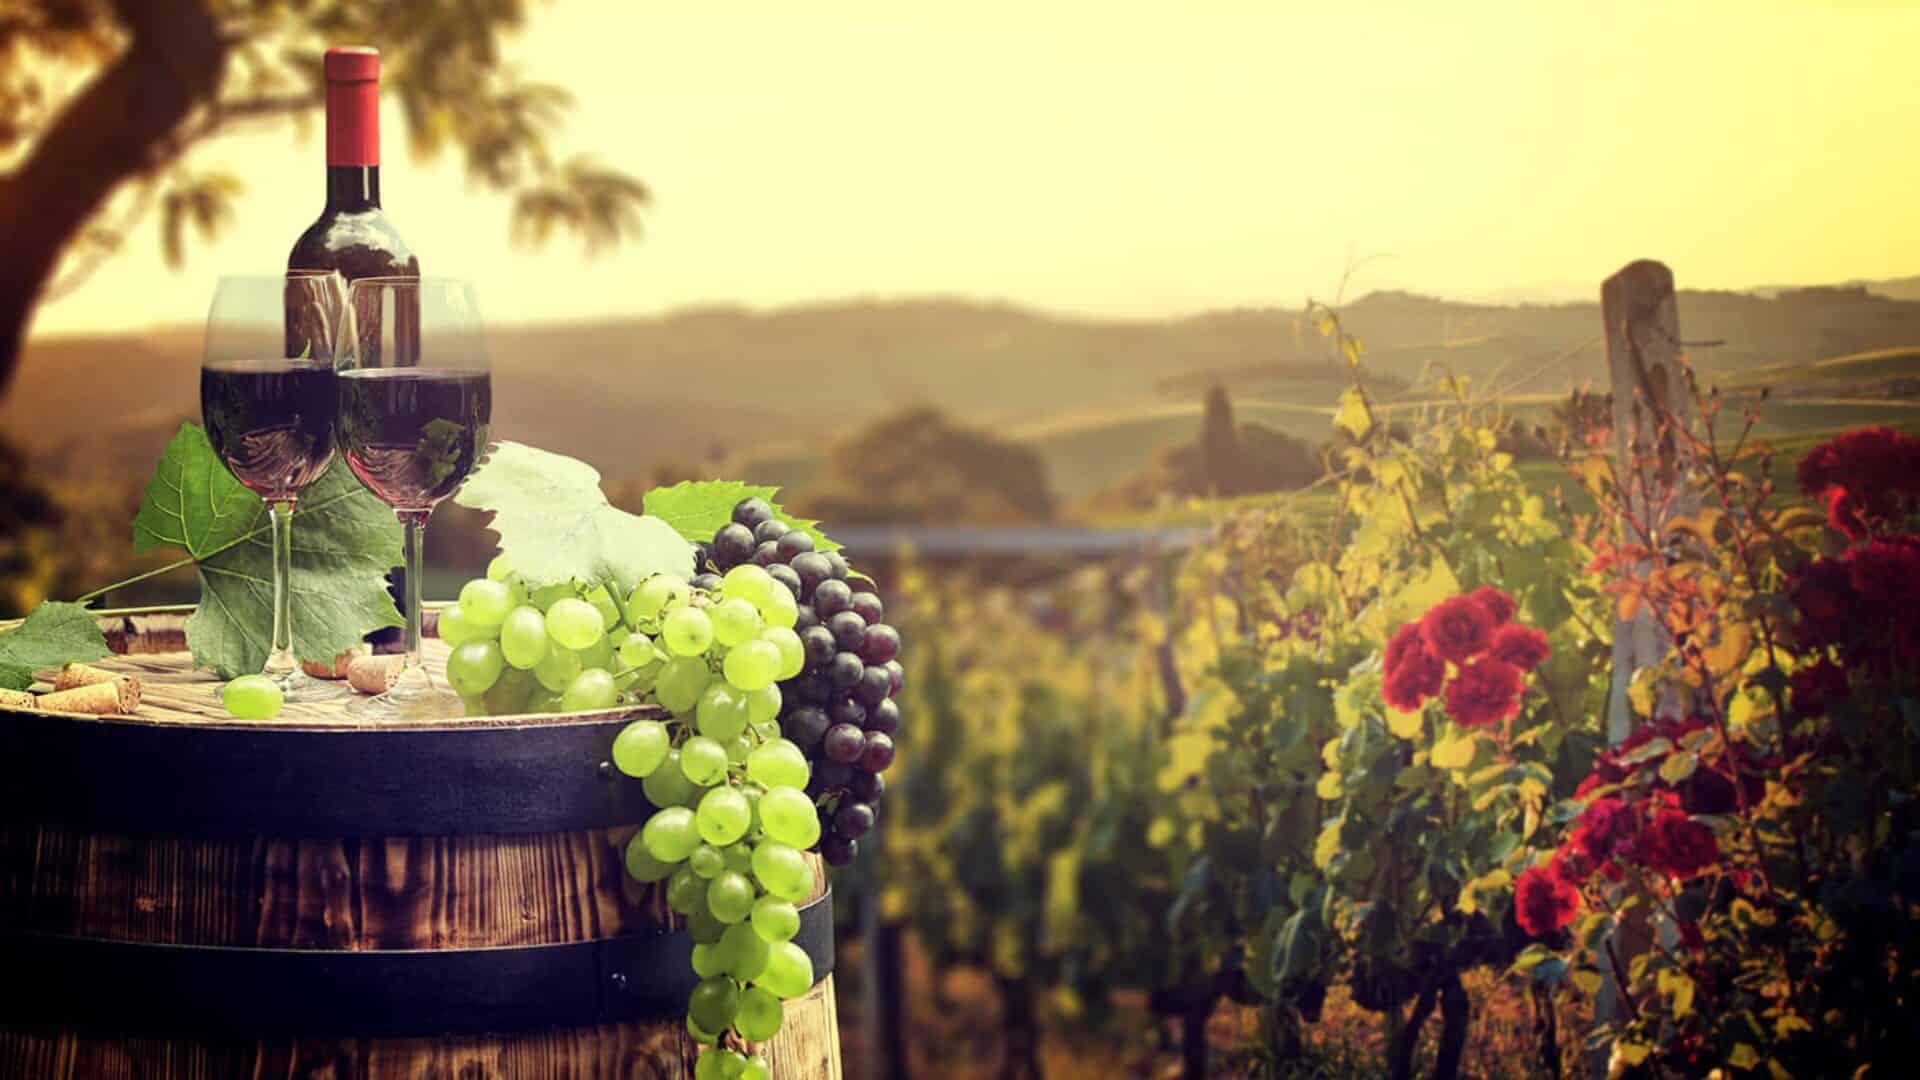 Two glasses full of red wine and green and red grapes sitting on top of a wooden barrel with grape vines in the background